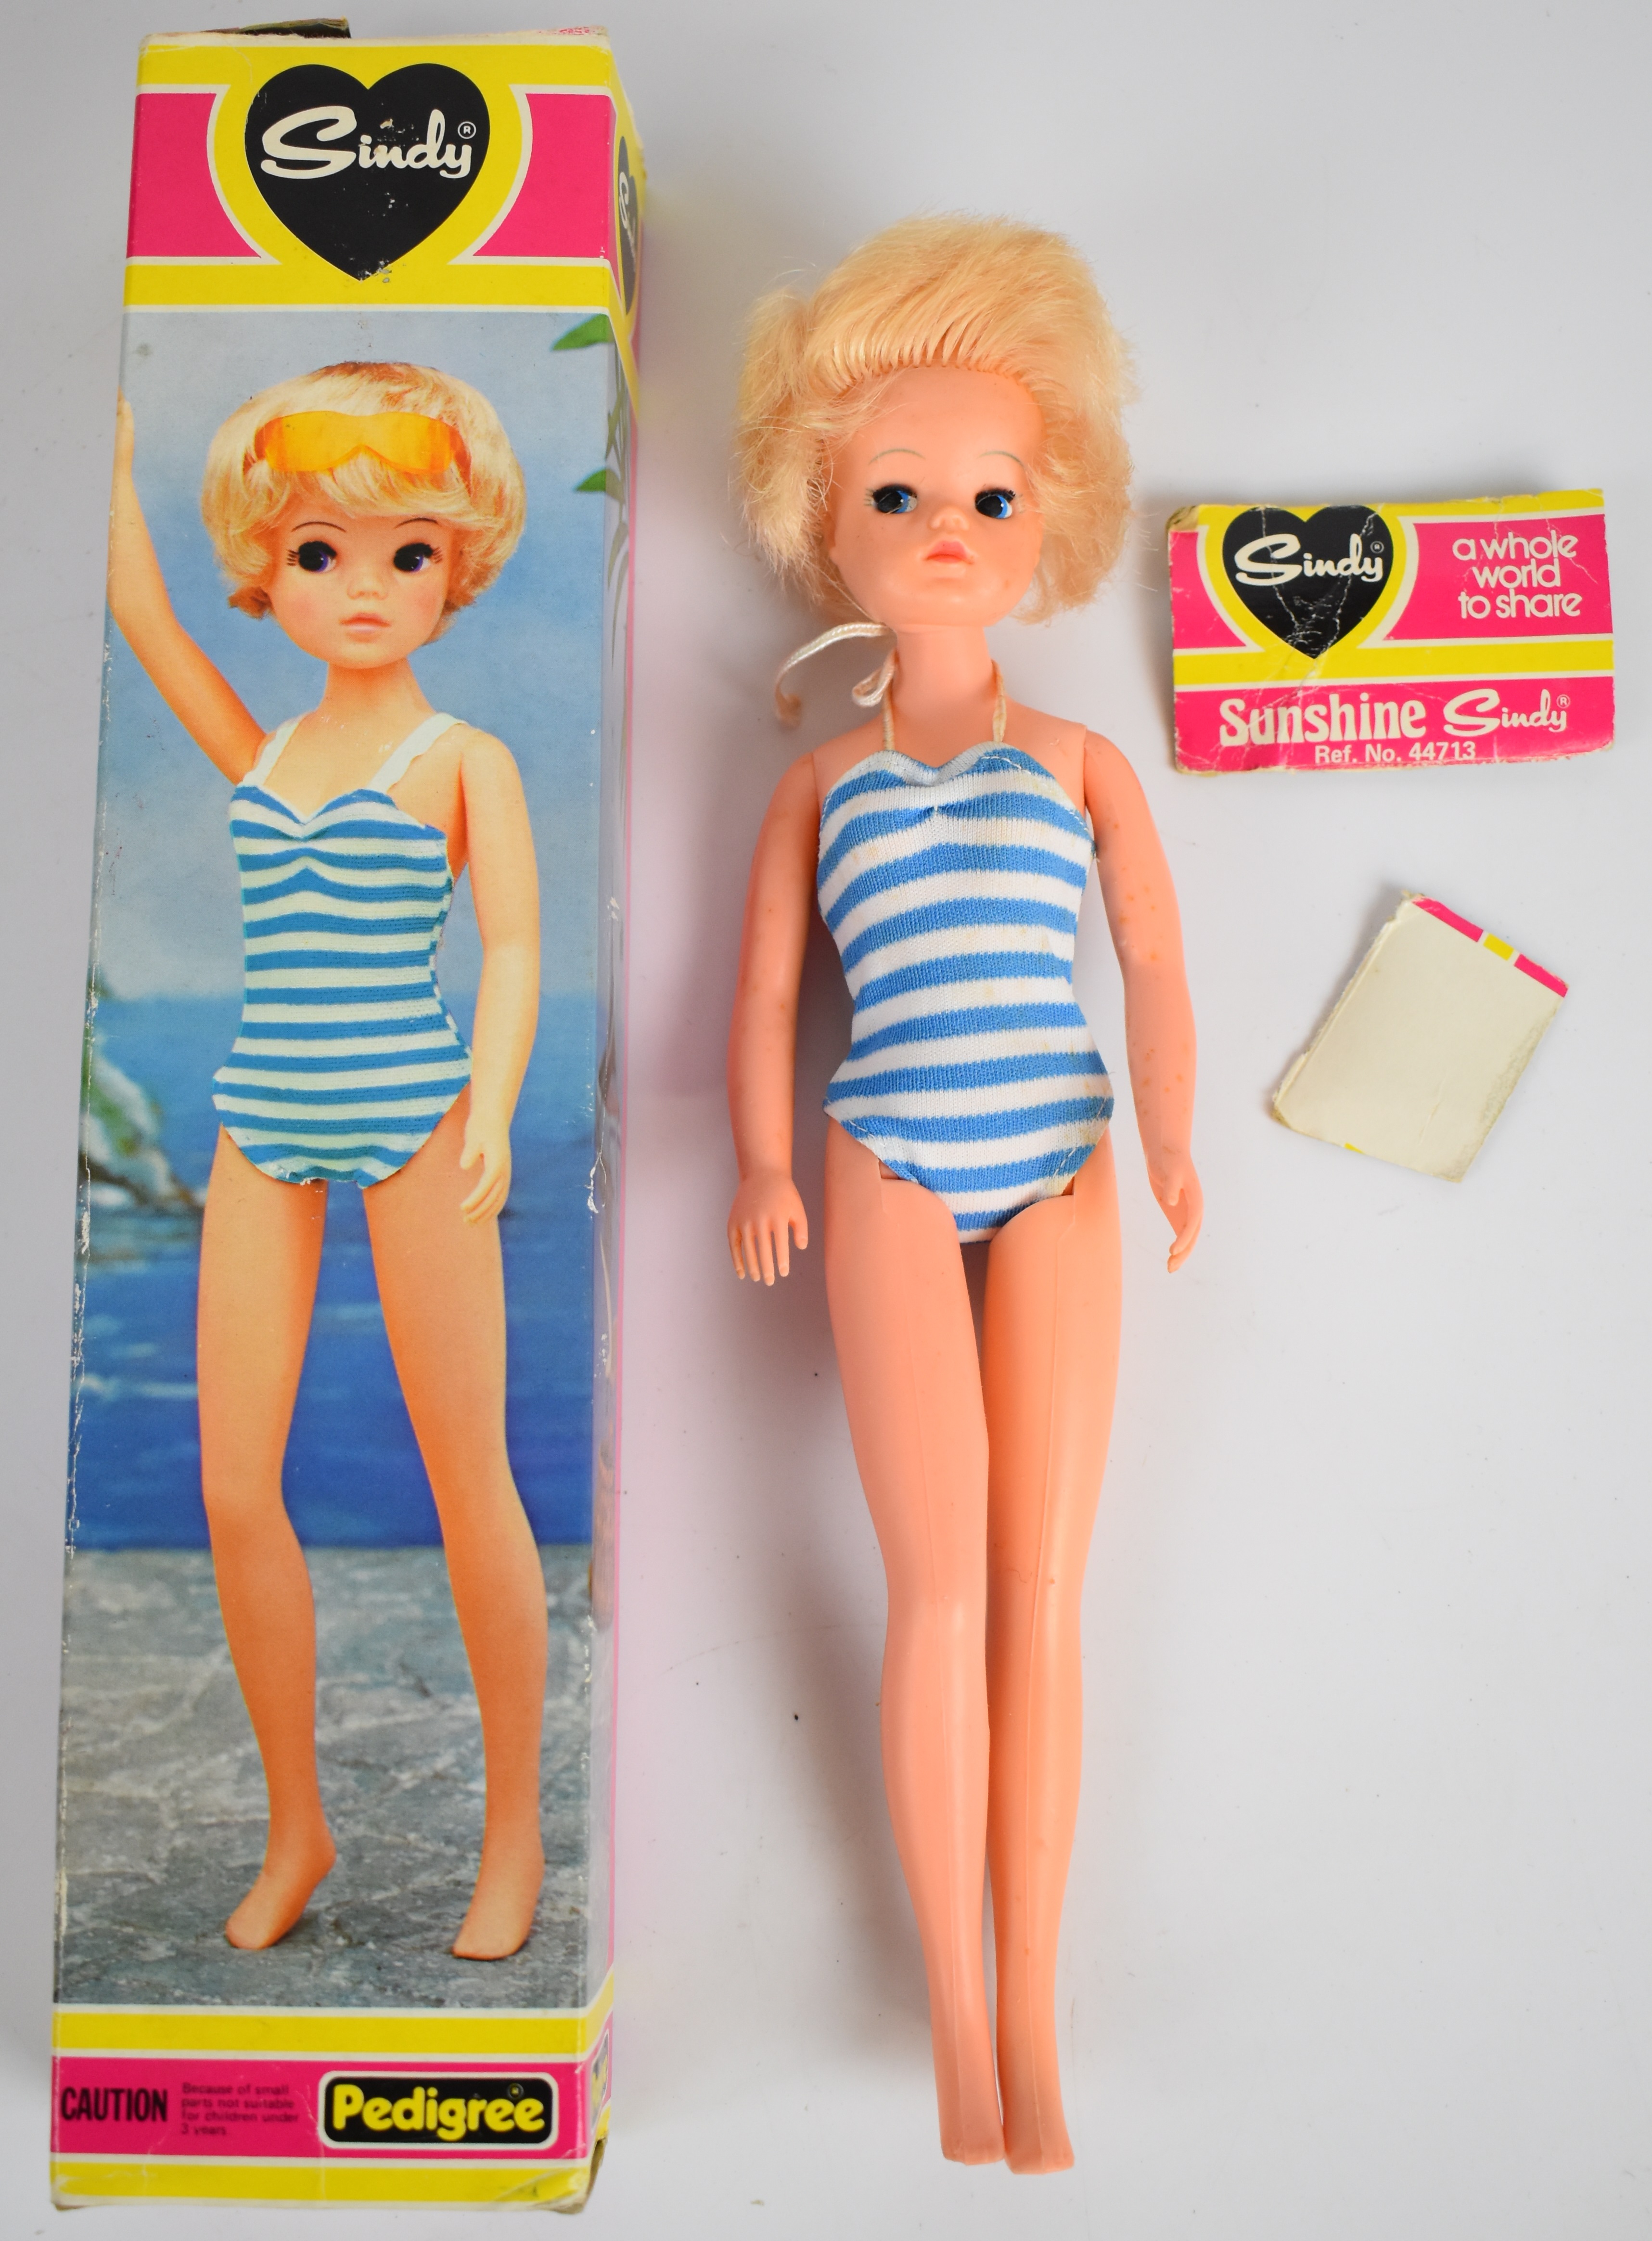 Pedigree Sunshine Sindy with short blonde hair and blue striped swimsuit, 44713, in original box.